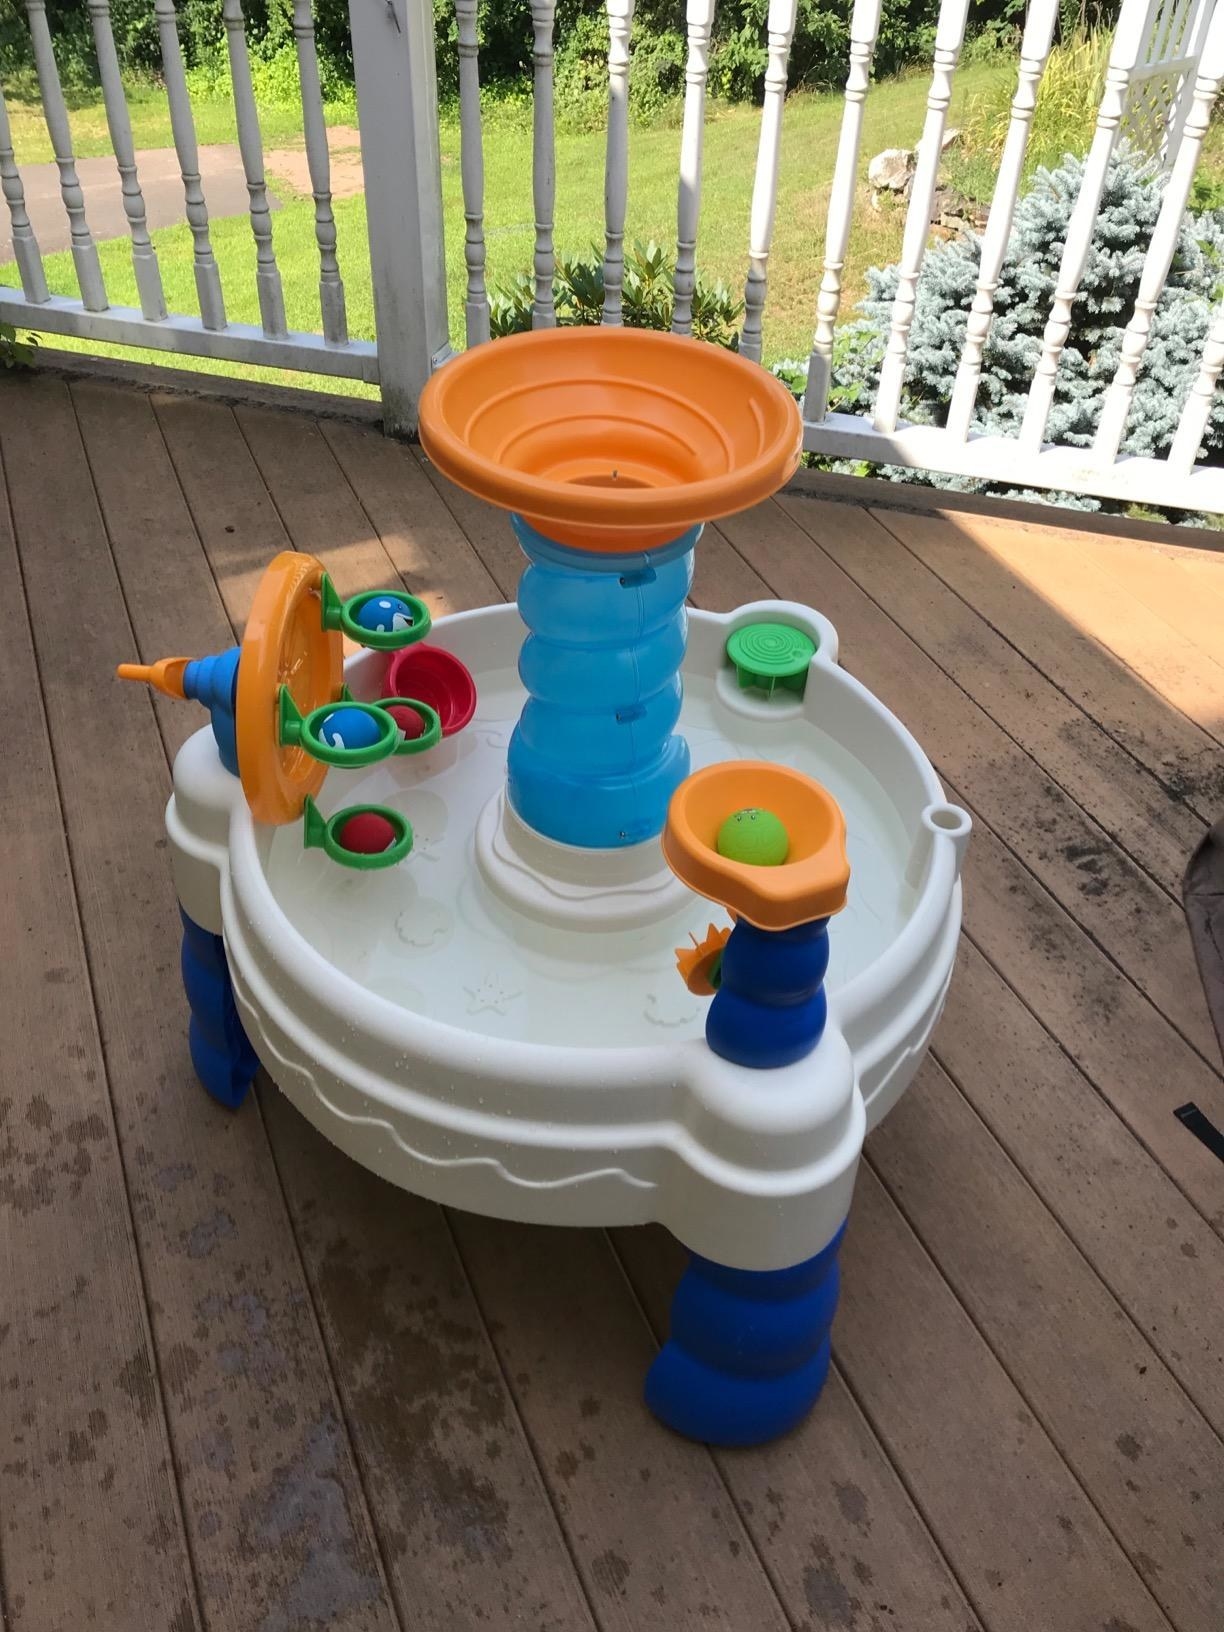 A white and blue plastic water table with multi-colored accents